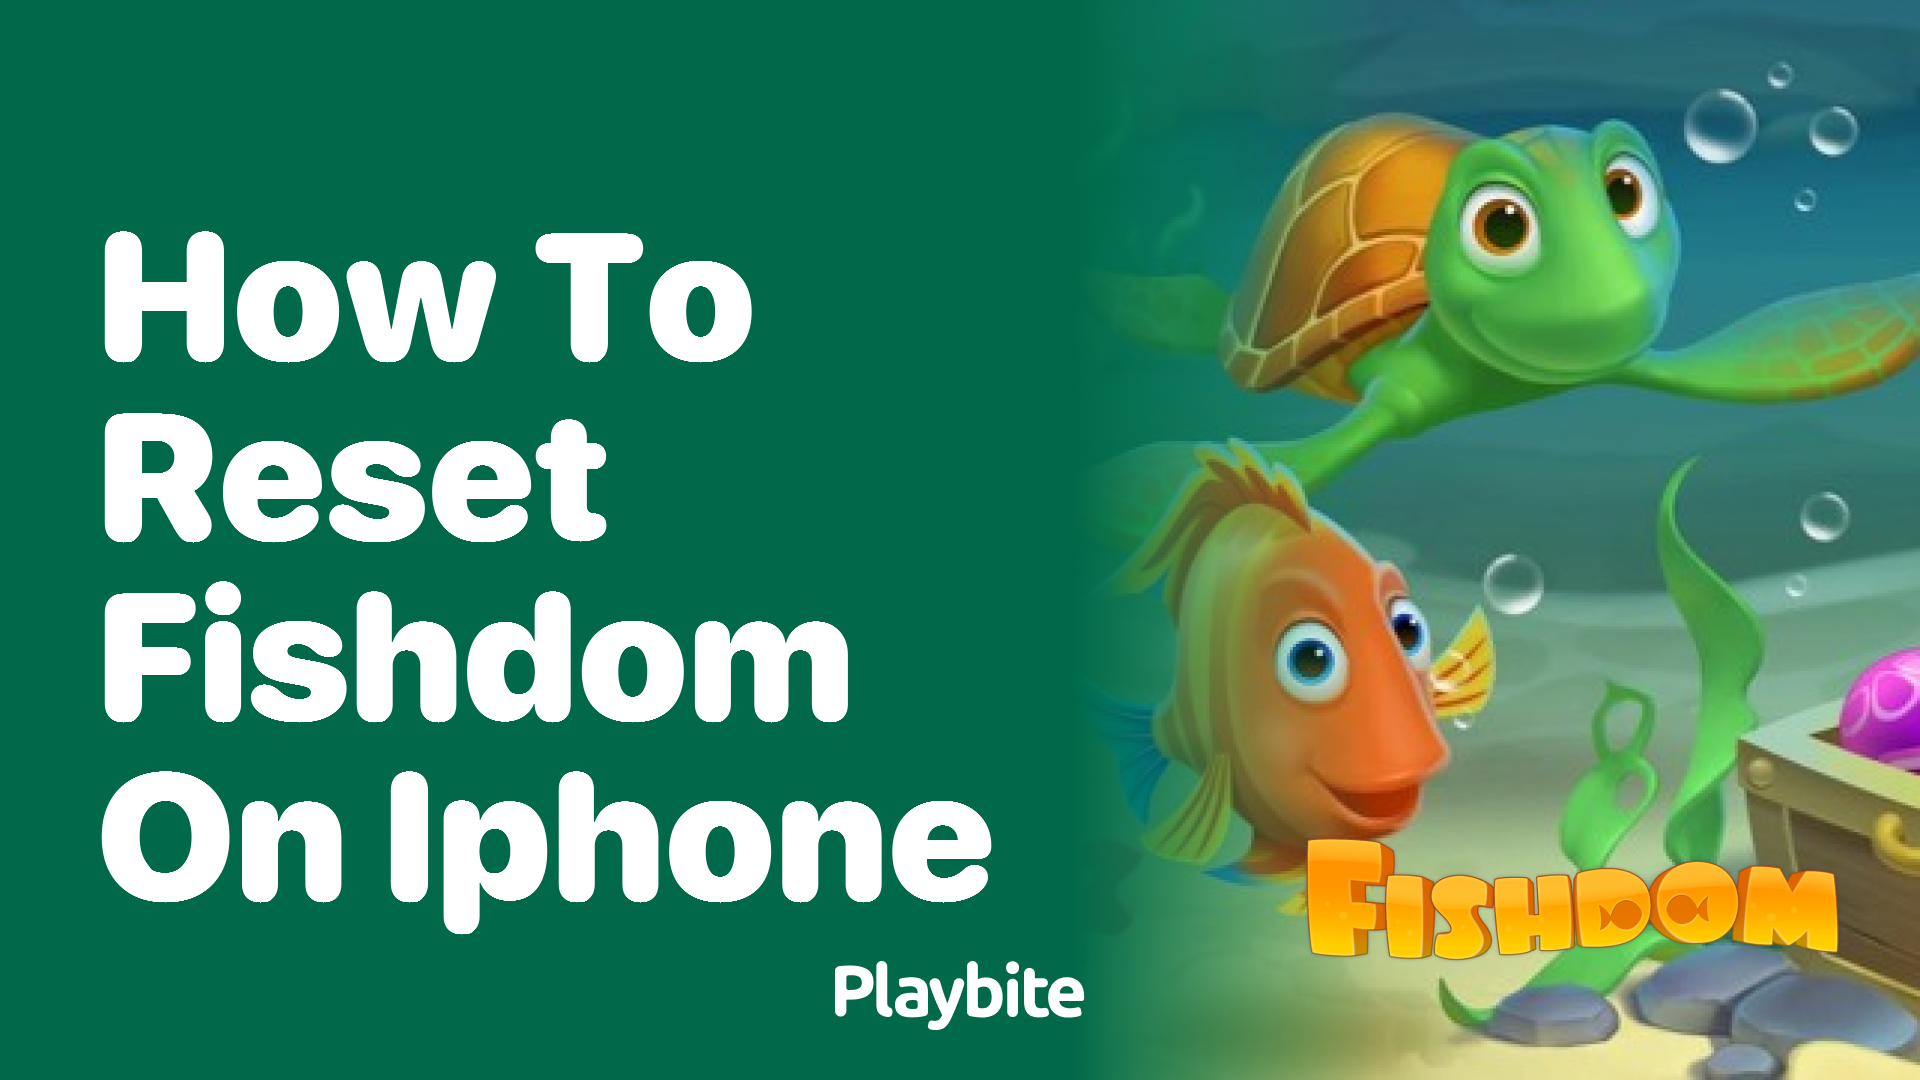 How to Reset Fishdom on iPhone: A Quick Guide